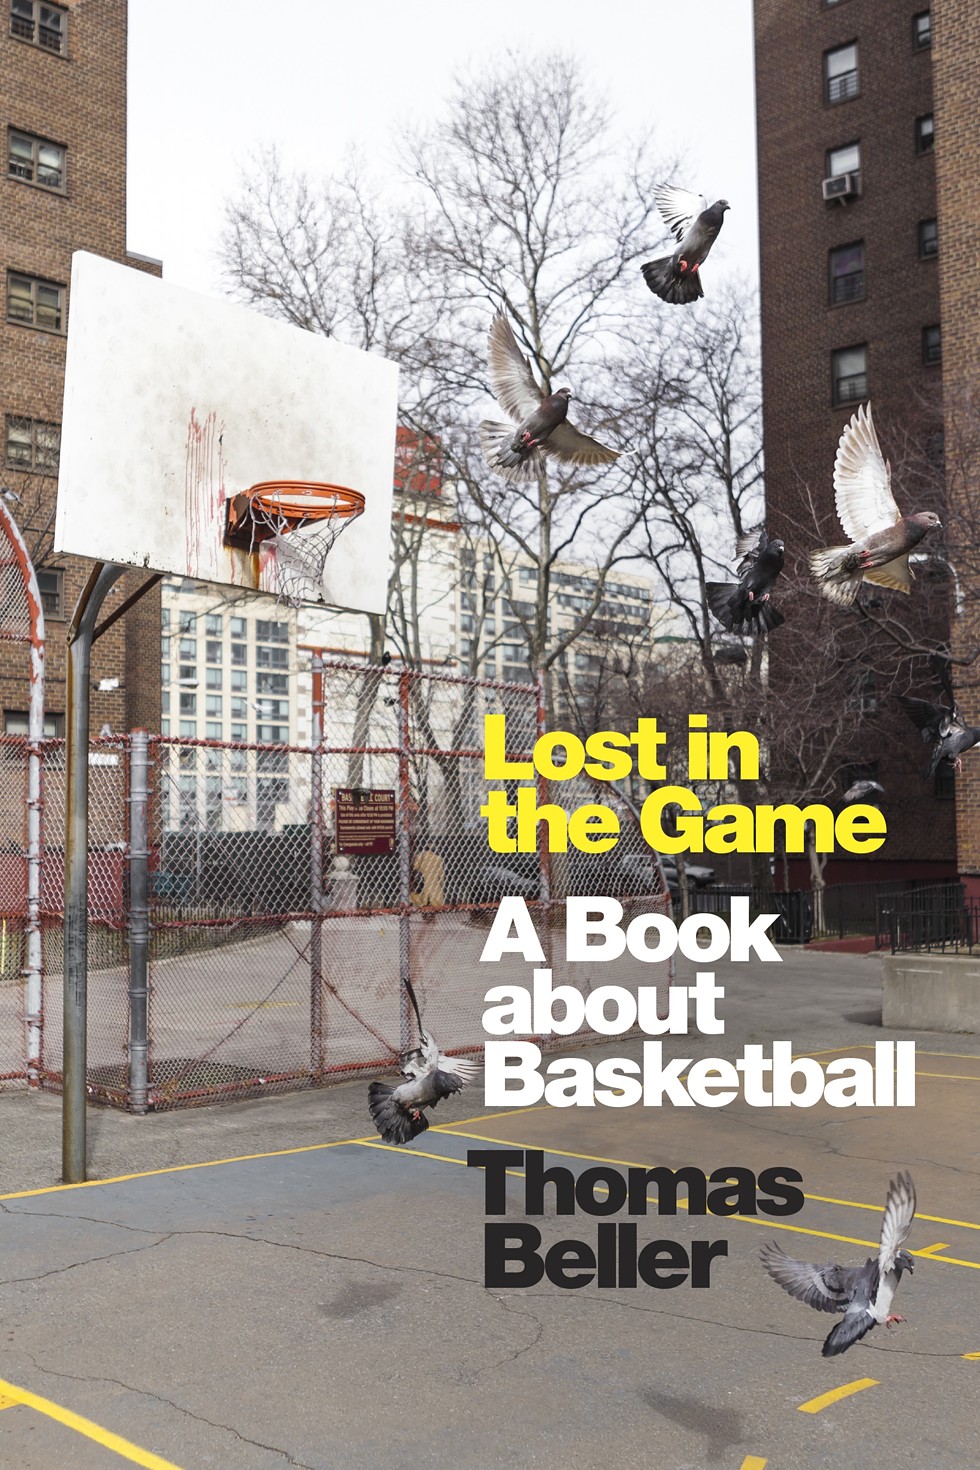 Lost in the Game: A Book about Basketball by Thomas Beller